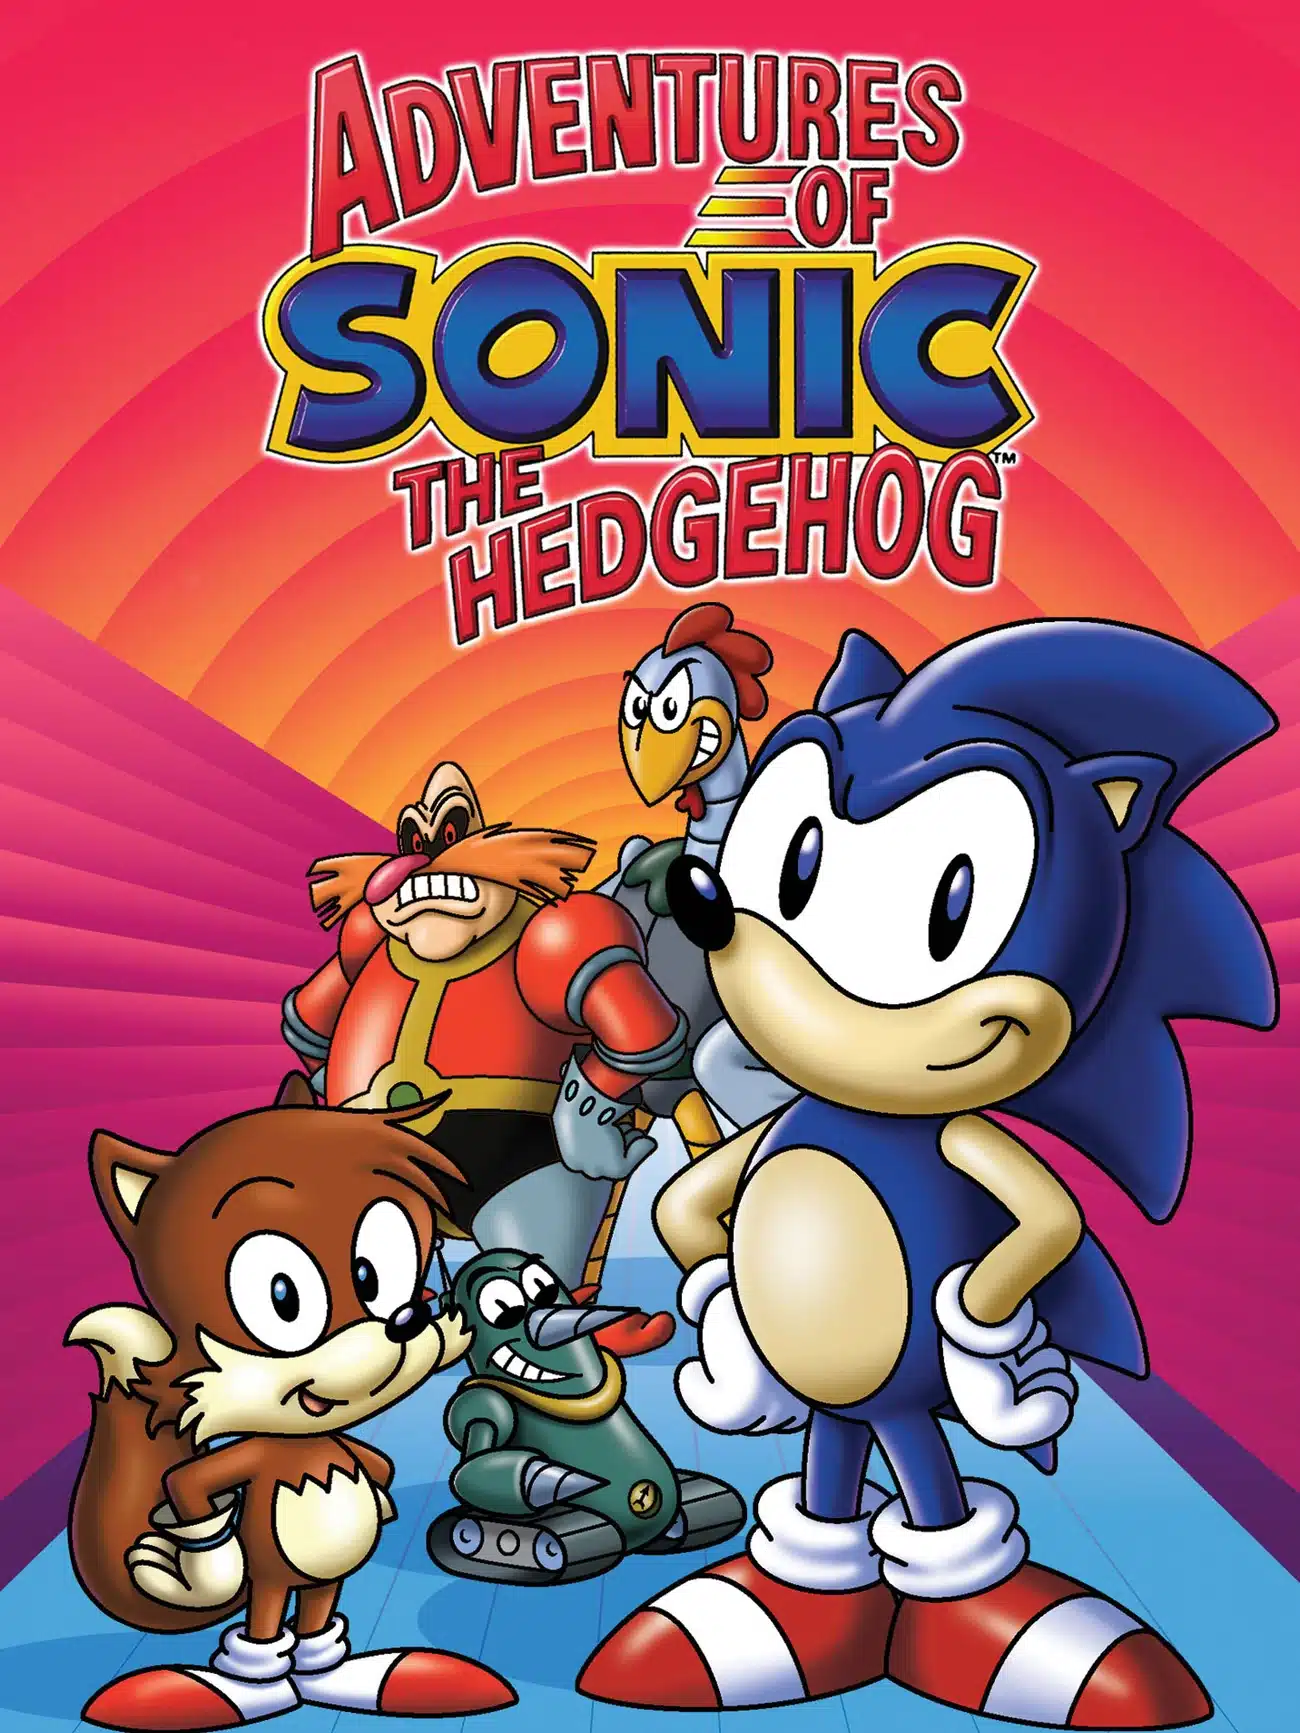 Adventures of Sonic the Hedgehog (1992) Best TV Shows Based on Video Games on Netflix